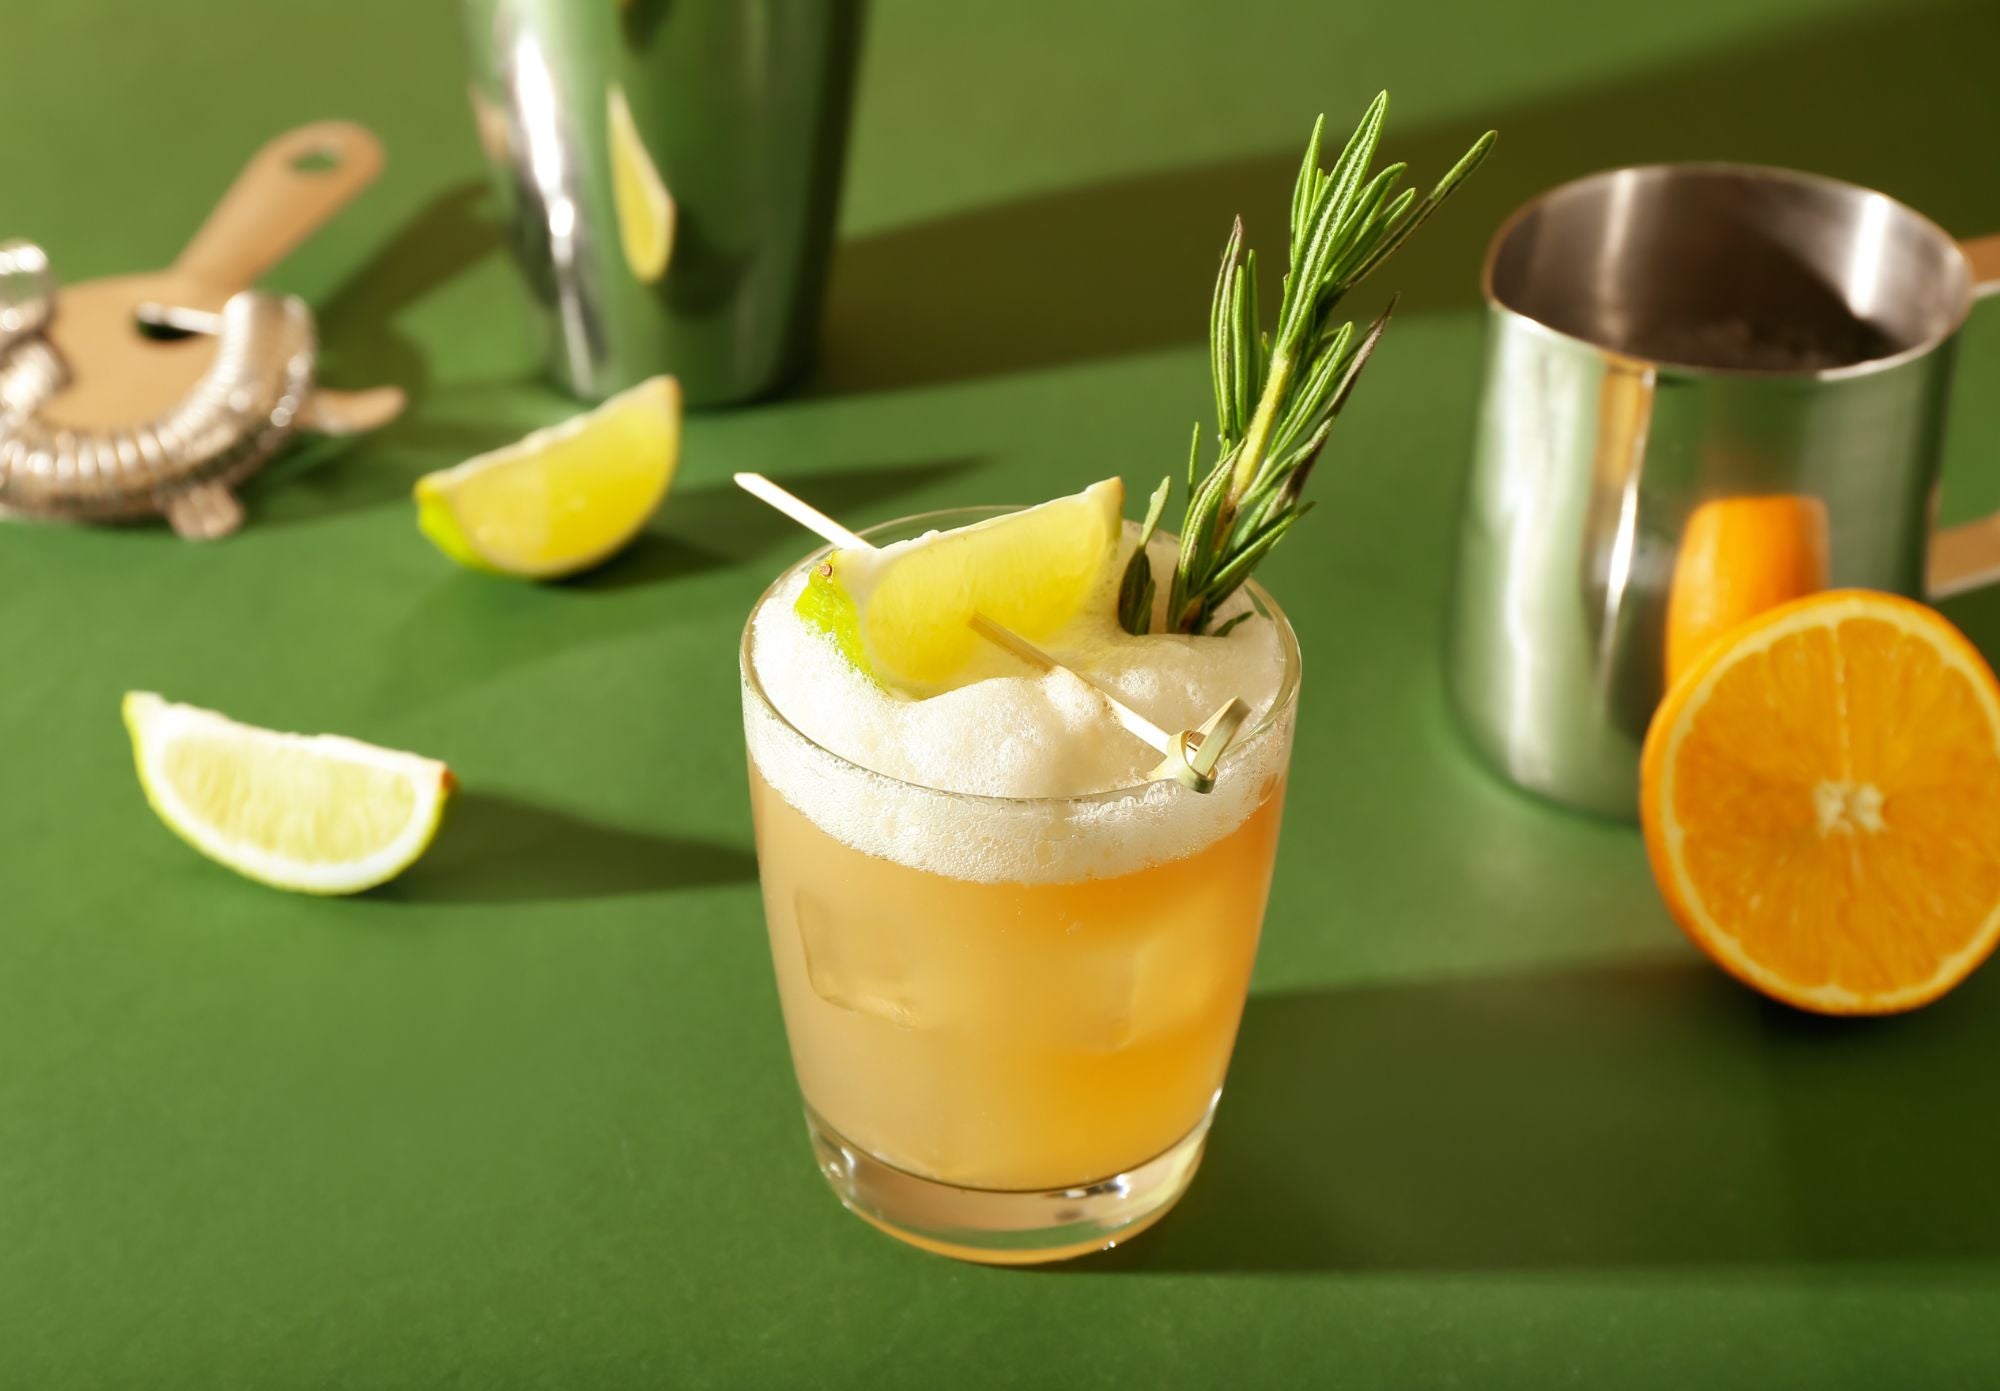 Sipping Sunshine: Crafting the Perfect Whiskey Sour to Match Morgan Wallen's Melodies